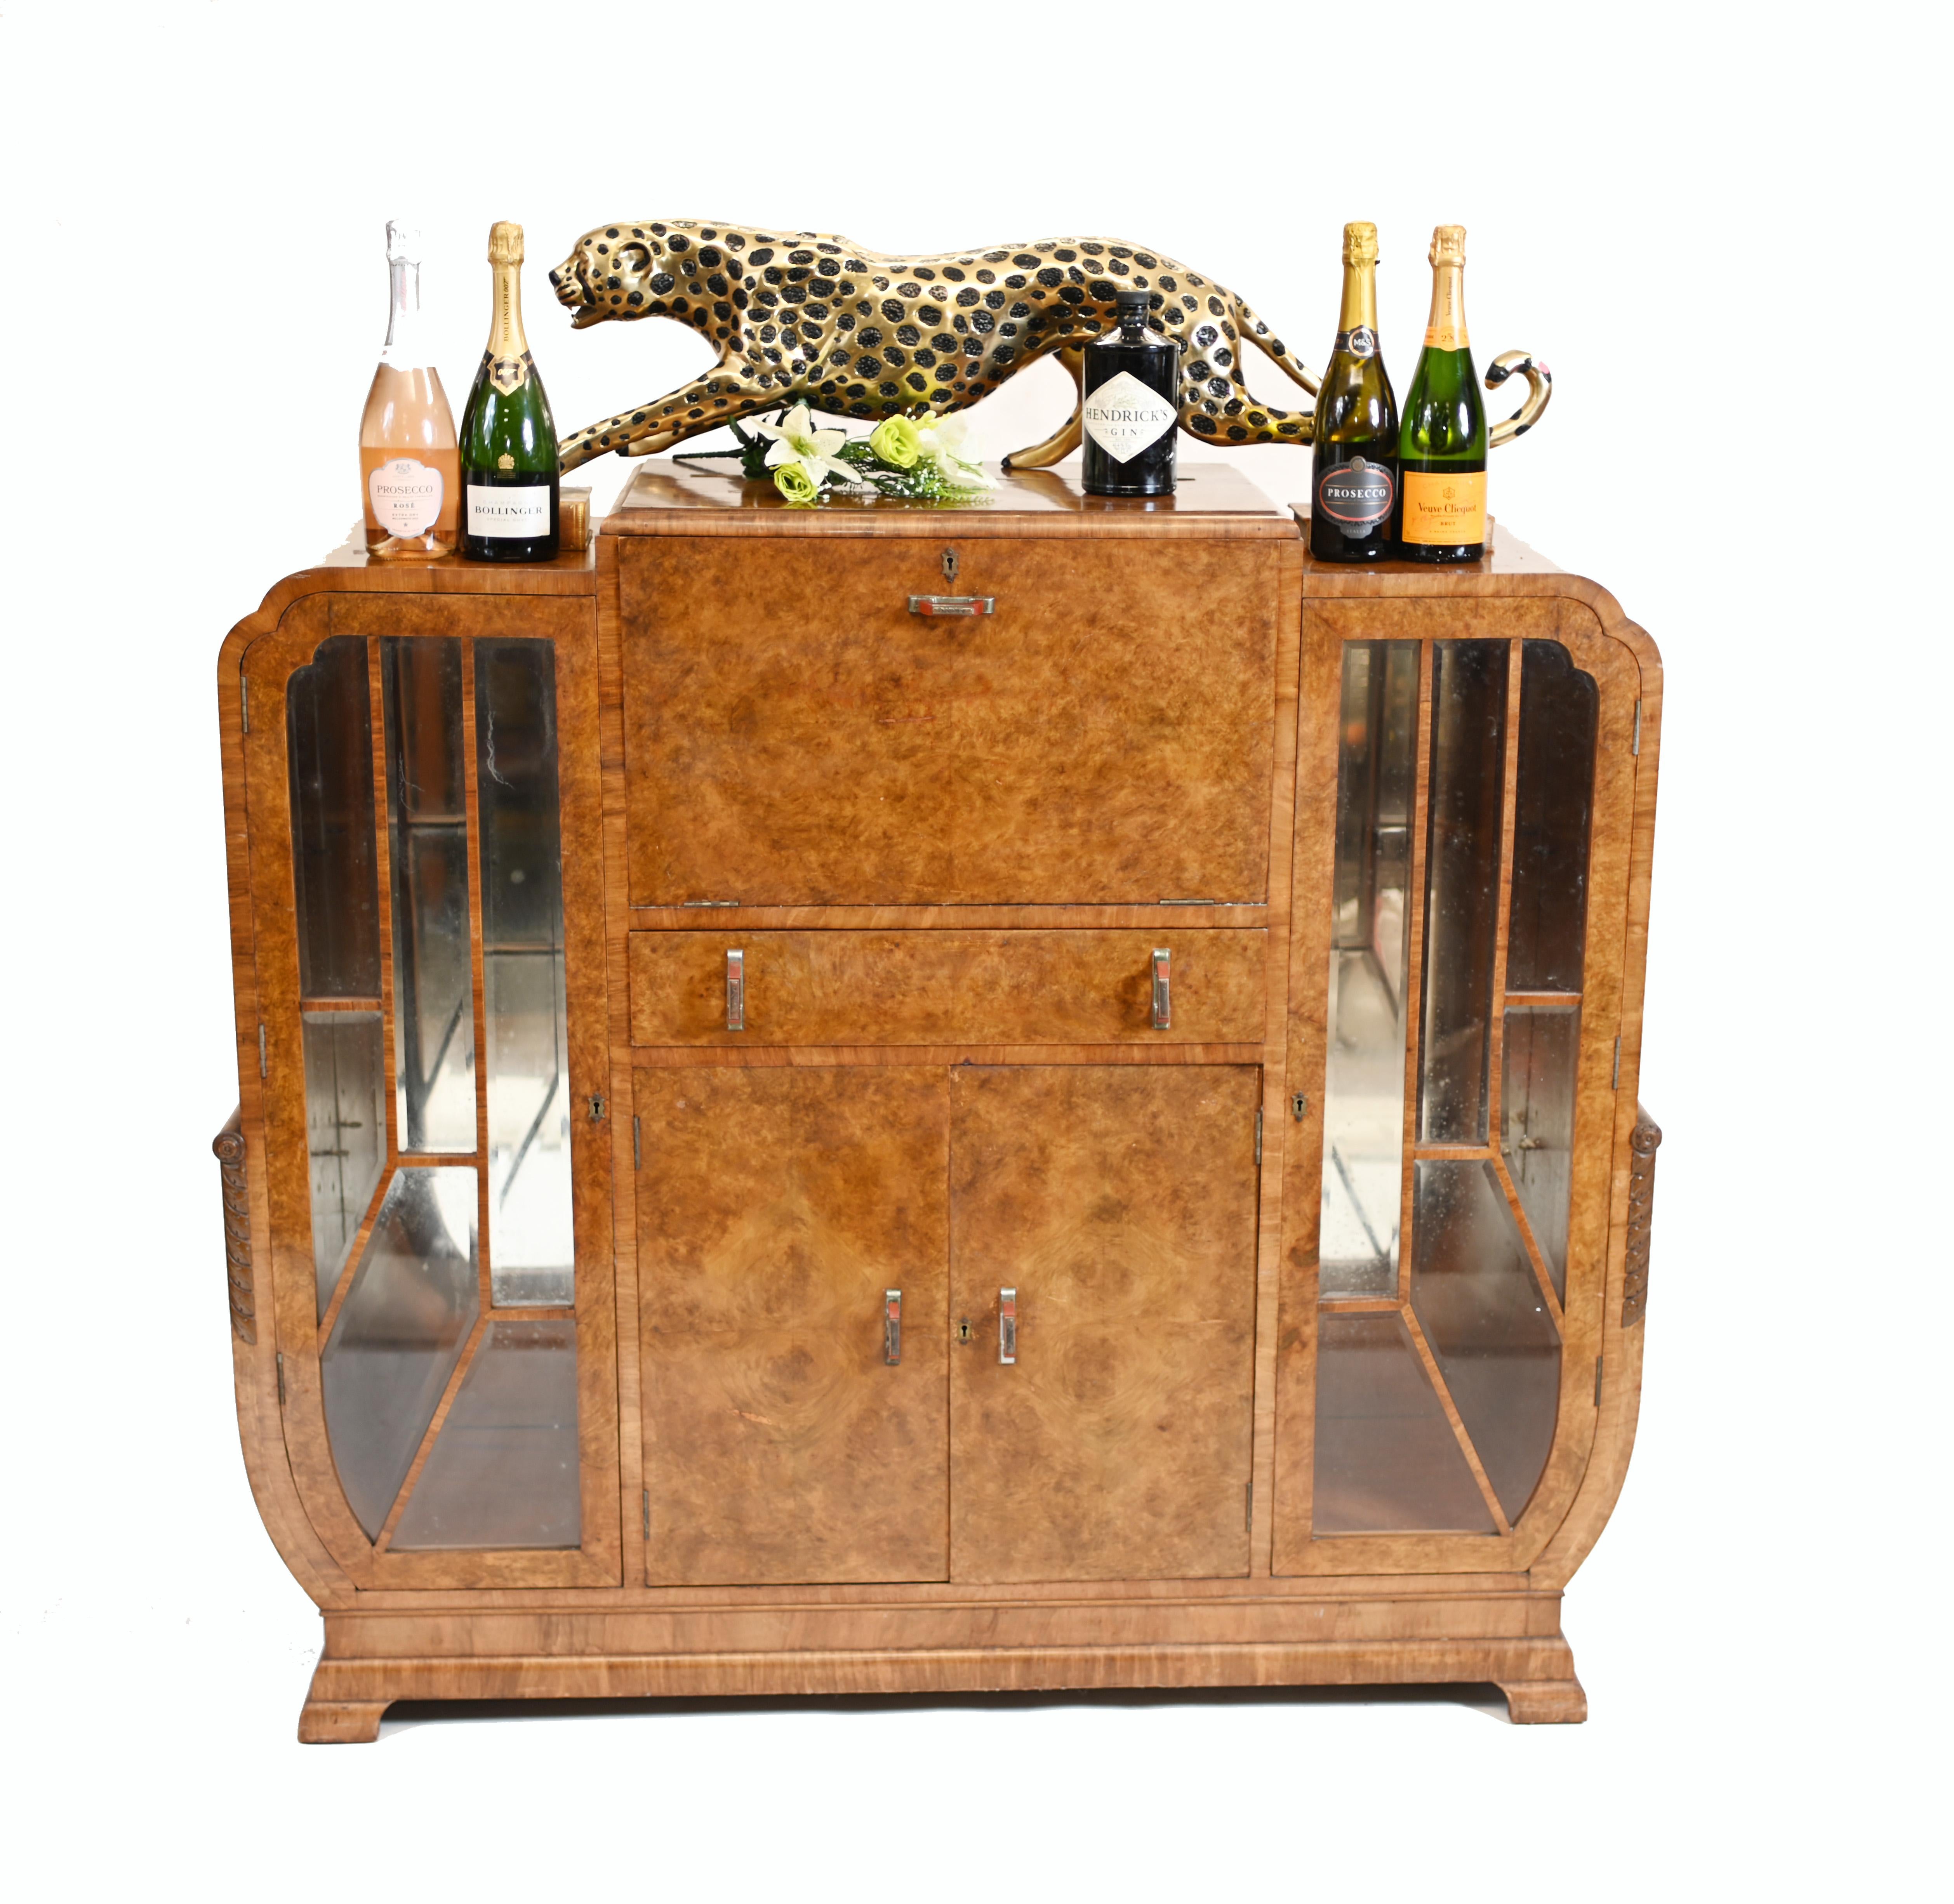 Absolutely classic period art deco cocktail cabinet in walnut
Classic symmetrical deco form
Crafted from walnut and opens out to reveal drink mixing area
Great interiors piece

Offered in great shape ready for home use right away.